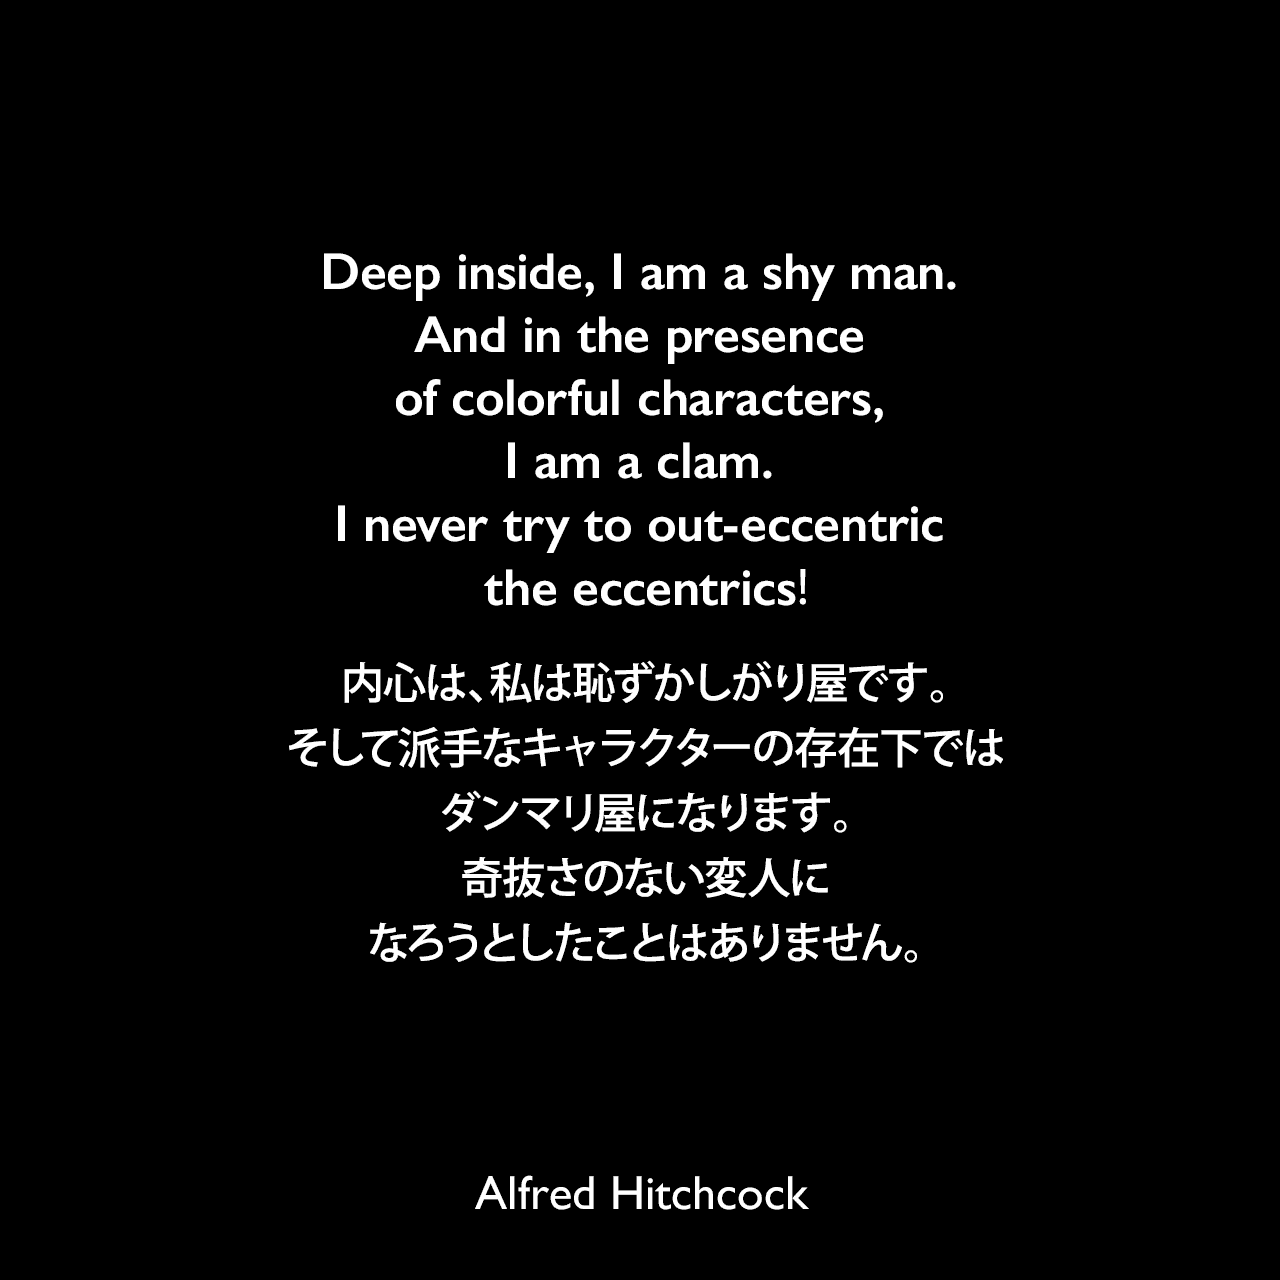 Deep inside, I am a shy man. And in the presence of colorful characters, I am a clam. I never try to out-eccentric the eccentrics!内心は、私は恥ずかしがり屋です。そして派手なキャラクターの存在下では、ダンマリ屋になります。奇抜さのない変人になろうとしたことはありません。- ニューヨーク・ヘラルド・トリビューン誌の「New York Close-Up」よりAlfred Hitchcock